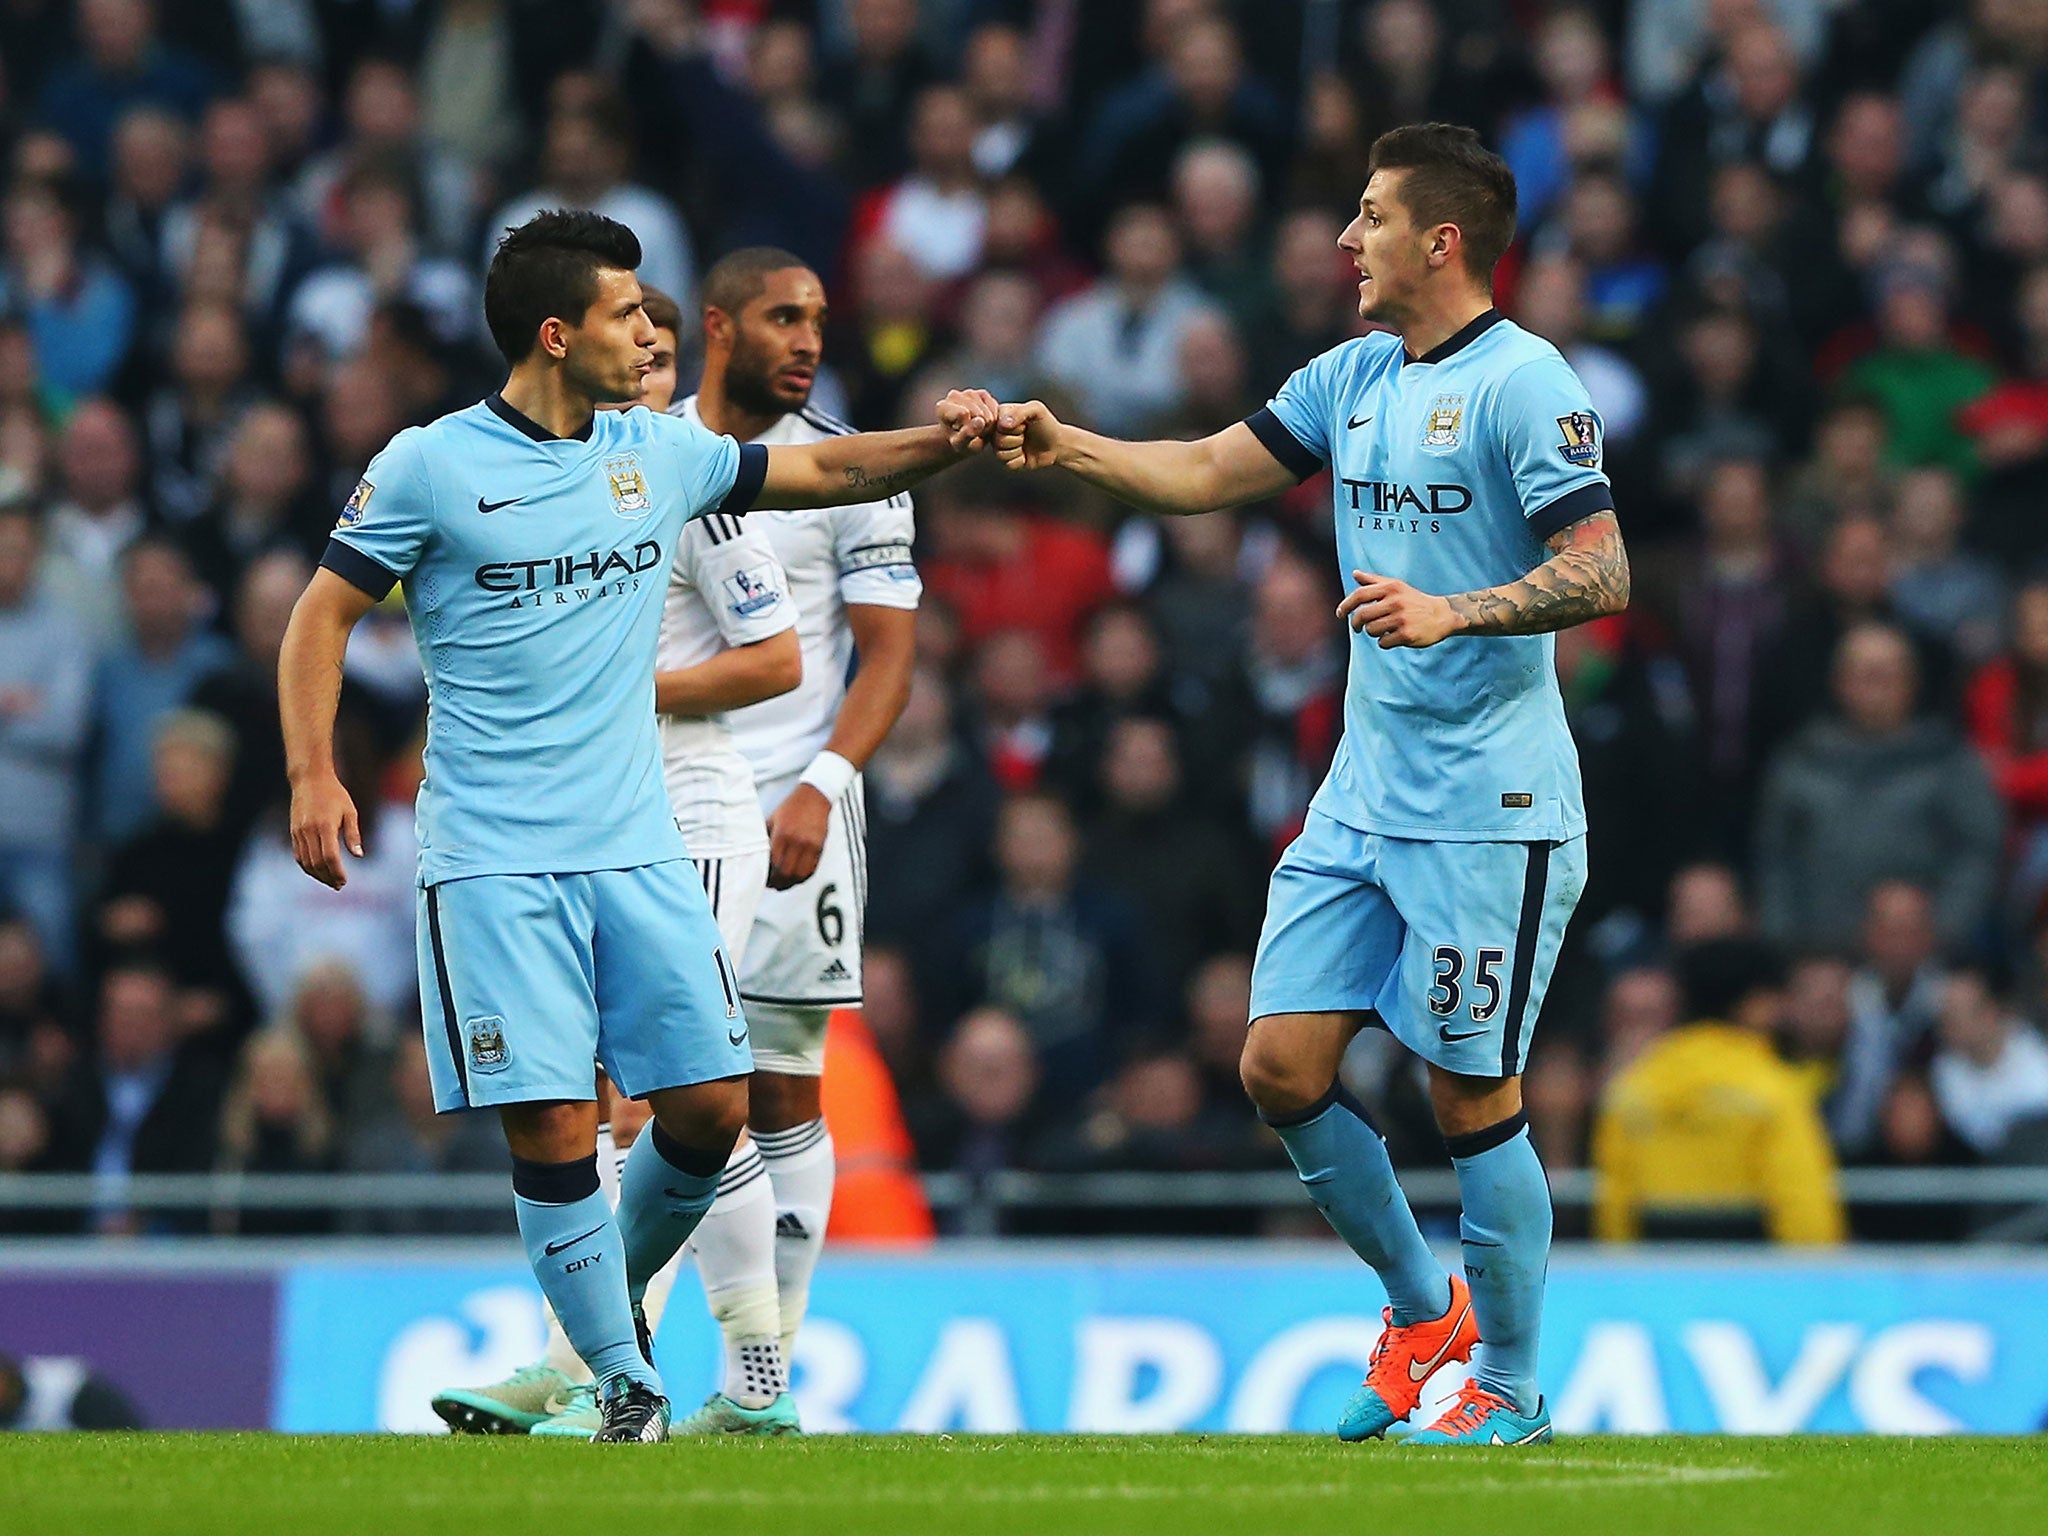 Sergio Aguero and Stevan Jovetic celebrate after the latter scores against Swansea